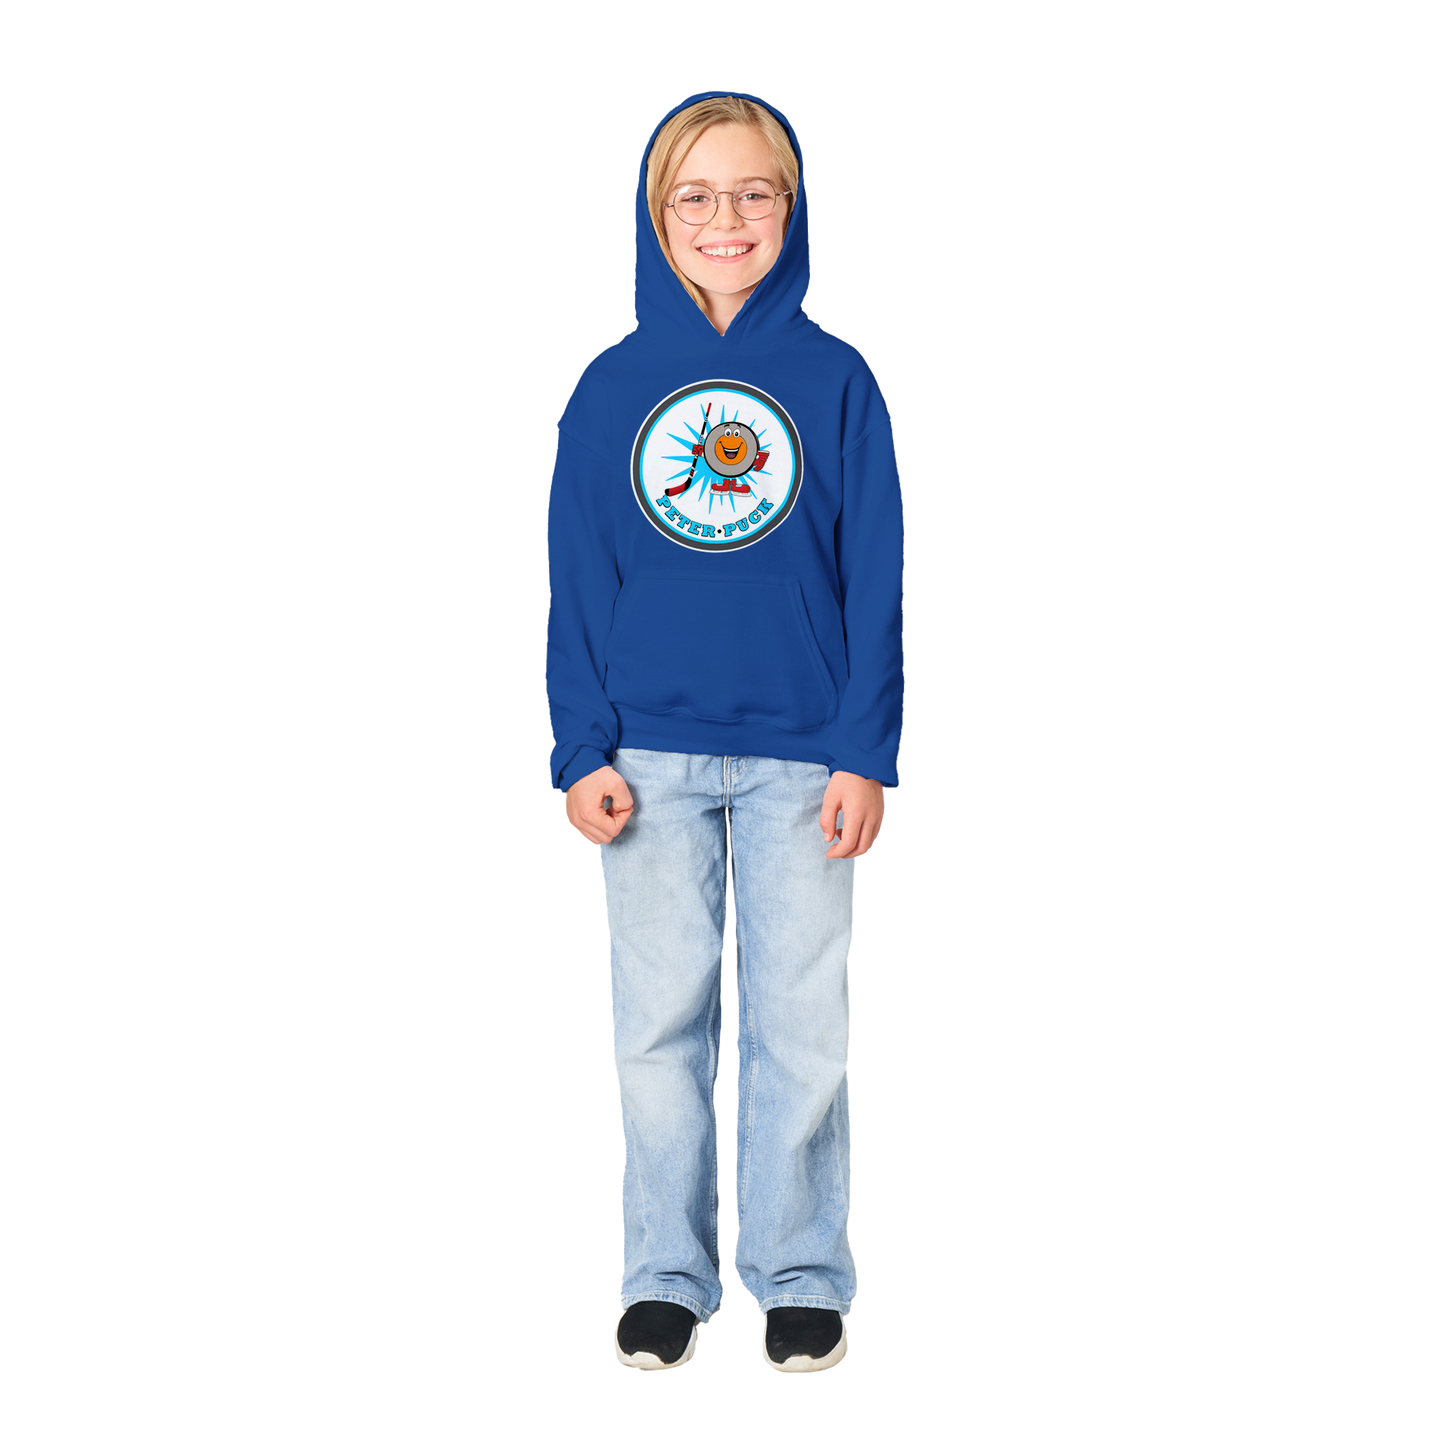 Peter Puck Pose Classic Kids Pullover Hoodie